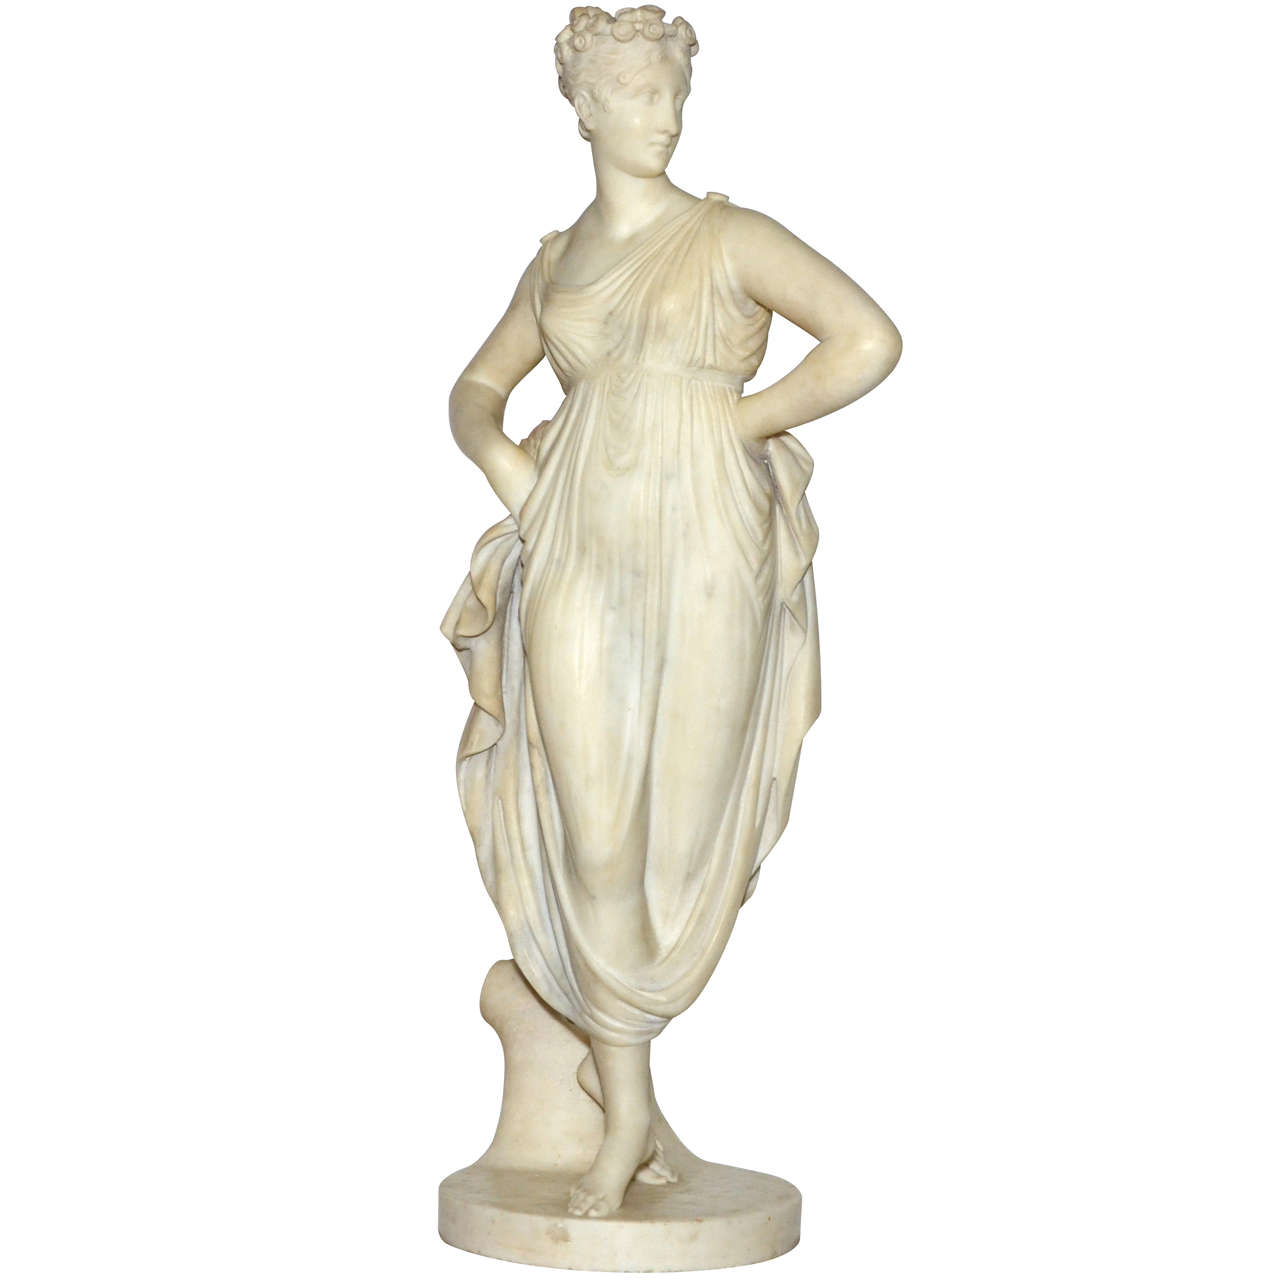 1820s Carrara Marble Statue of a Draped Woman For Sale